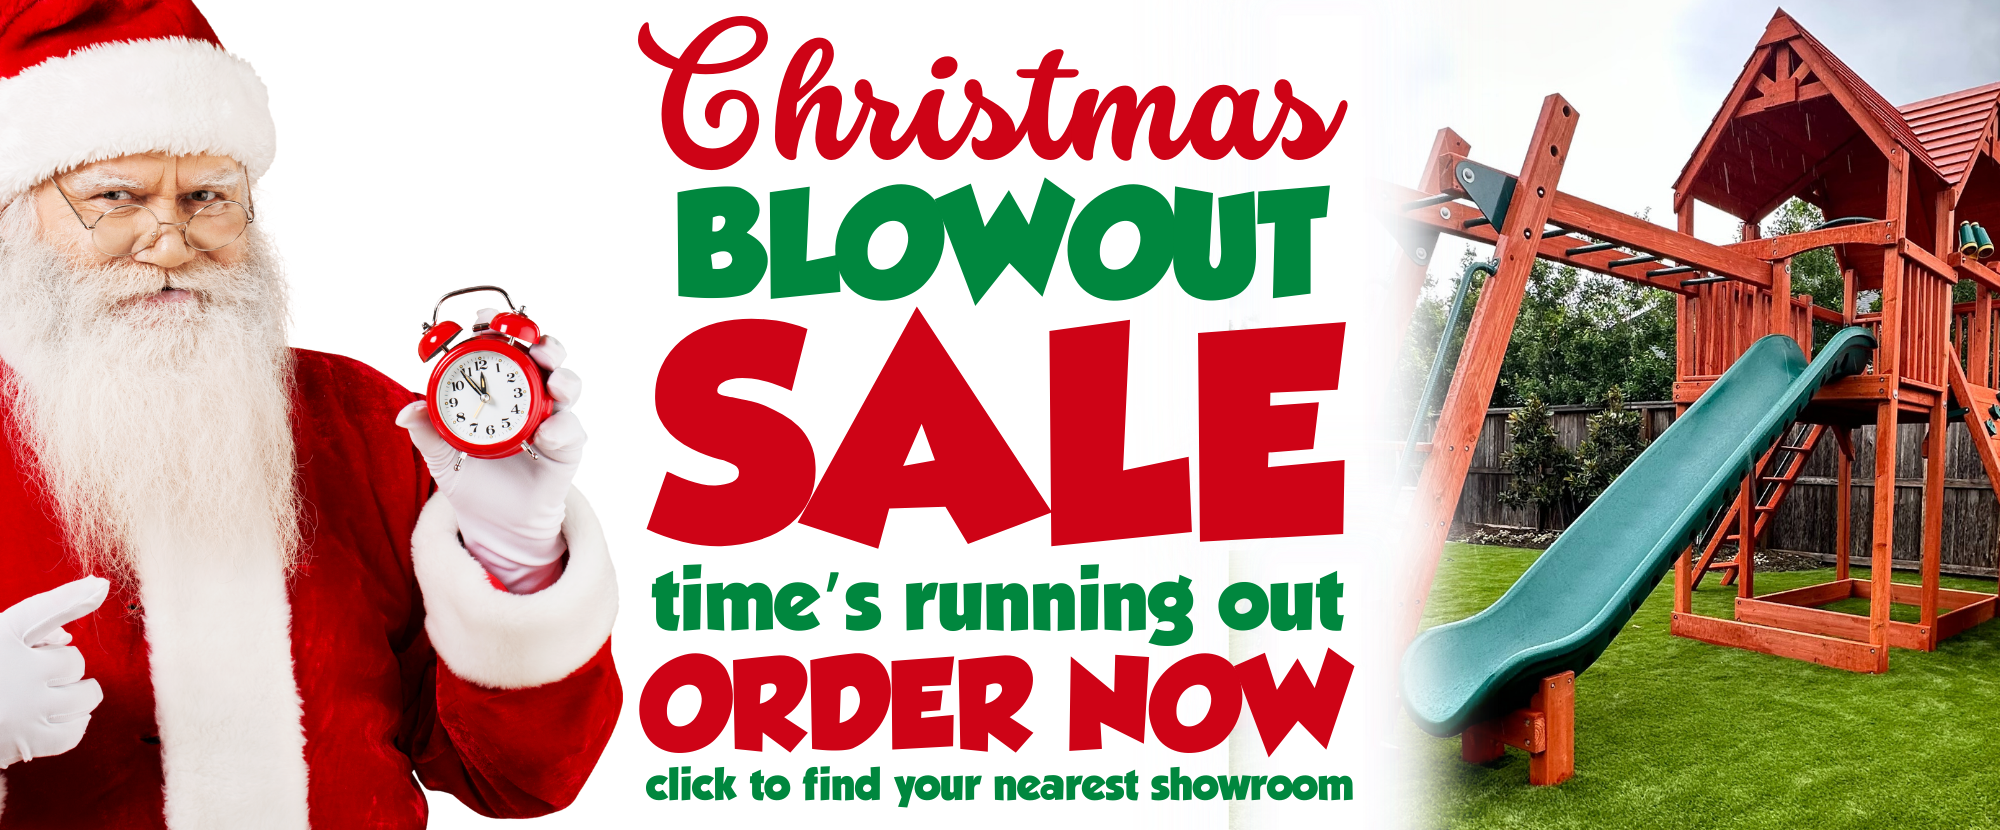 River City Play Systems Christmas Blowout Sale - Find a Showroom